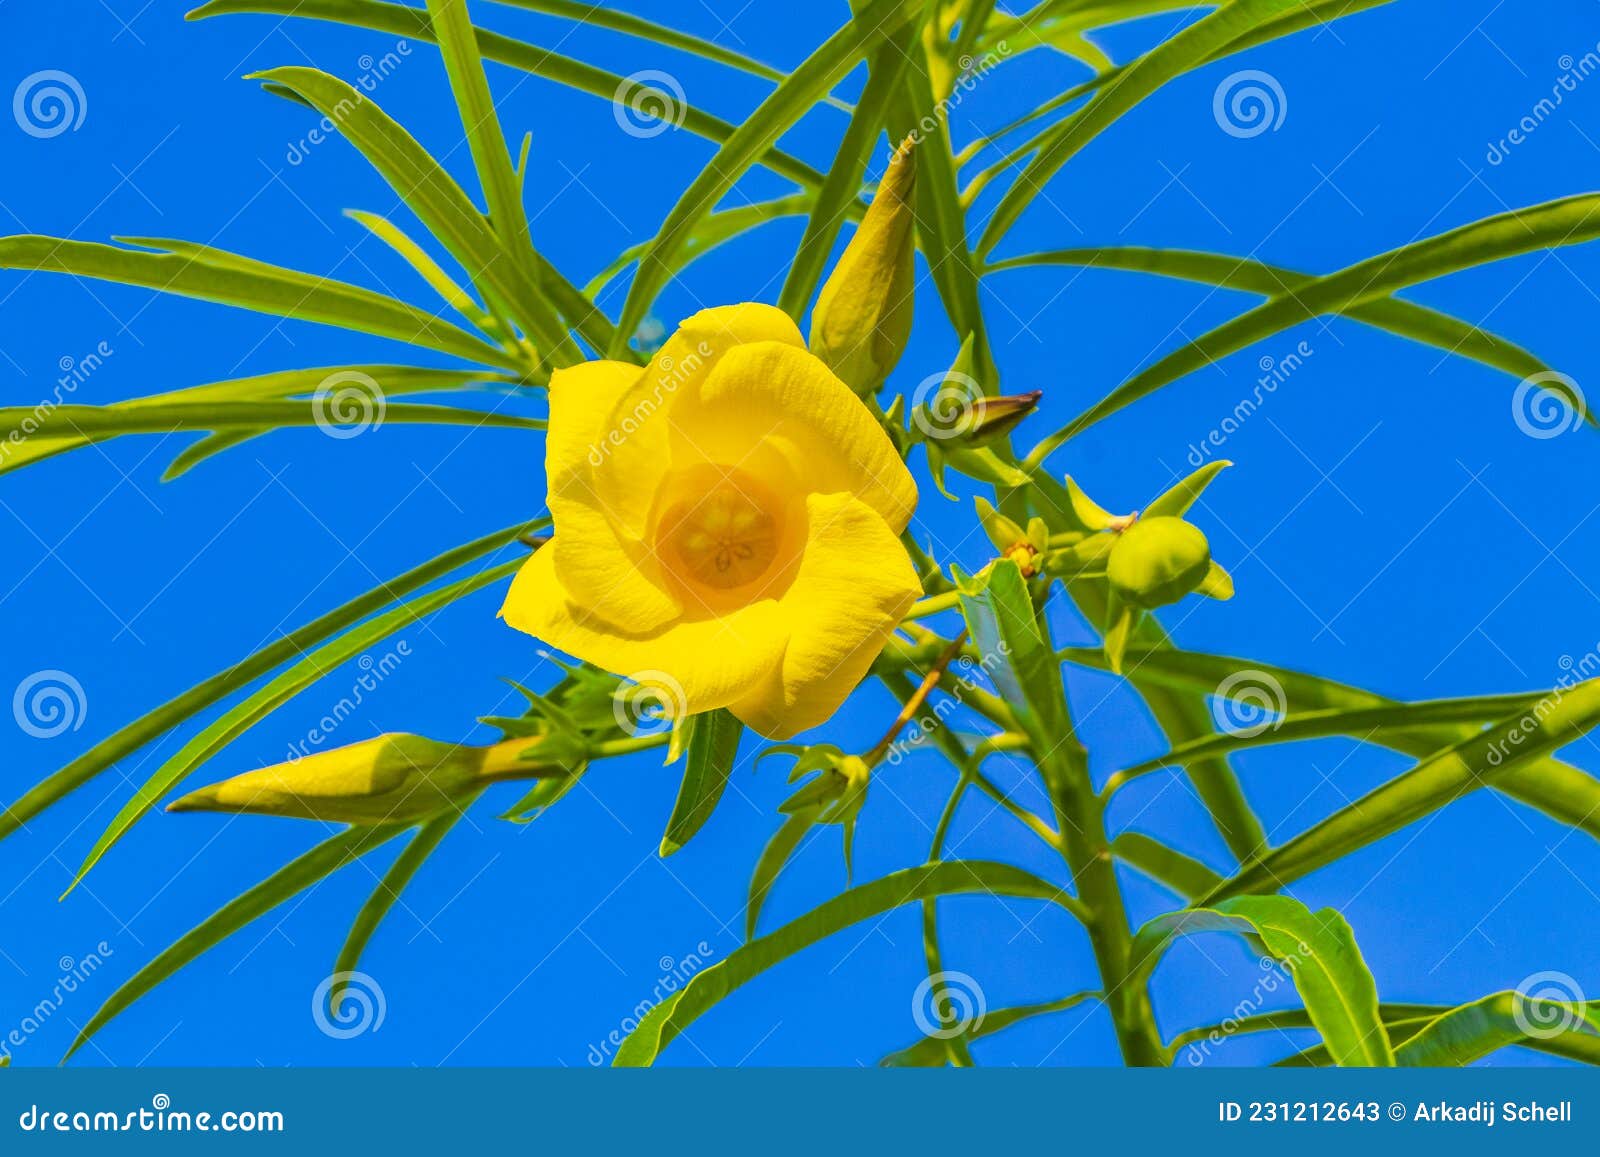 Yellow Oleander Flower on Tree with Blue Sky in Mexico Stock Image ...